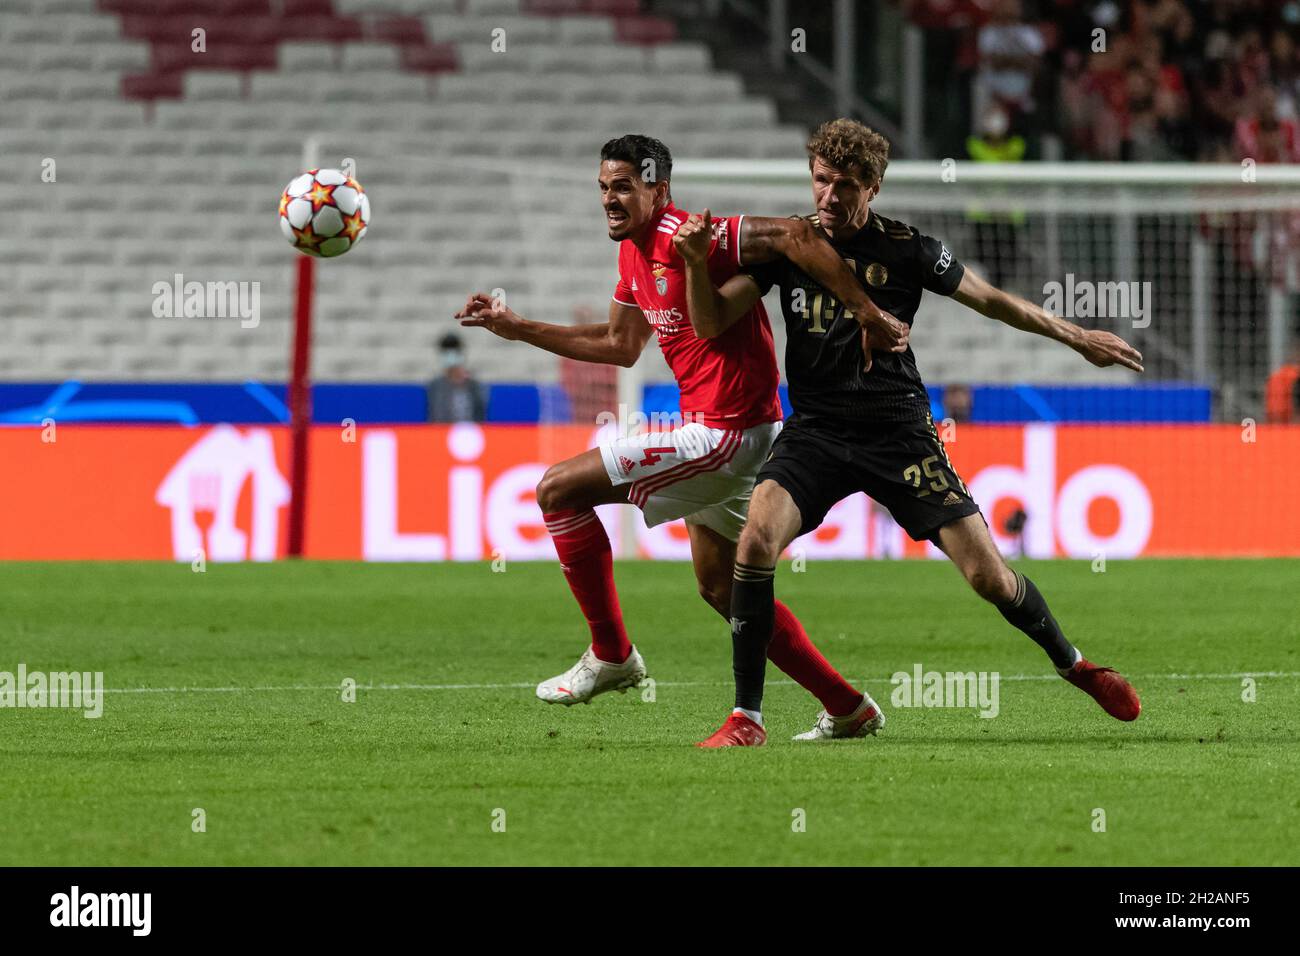 Lisbon, Portugal. 20th Oct, 2021. Lucas Verissimo (left) of SL Benfica and Thomas Muller (right) of FC Bayern Munich in action during the UEFA Champions League match between SL Benfica and FC Bayern Munich at Estadio da Luz stadium.Final score; SL Benfica 0:4 FC Bayern Munich. (Photo by Hugo Amaral/SOPA Images/Sipa USA) Credit: Sipa USA/Alamy Live News Stock Photo